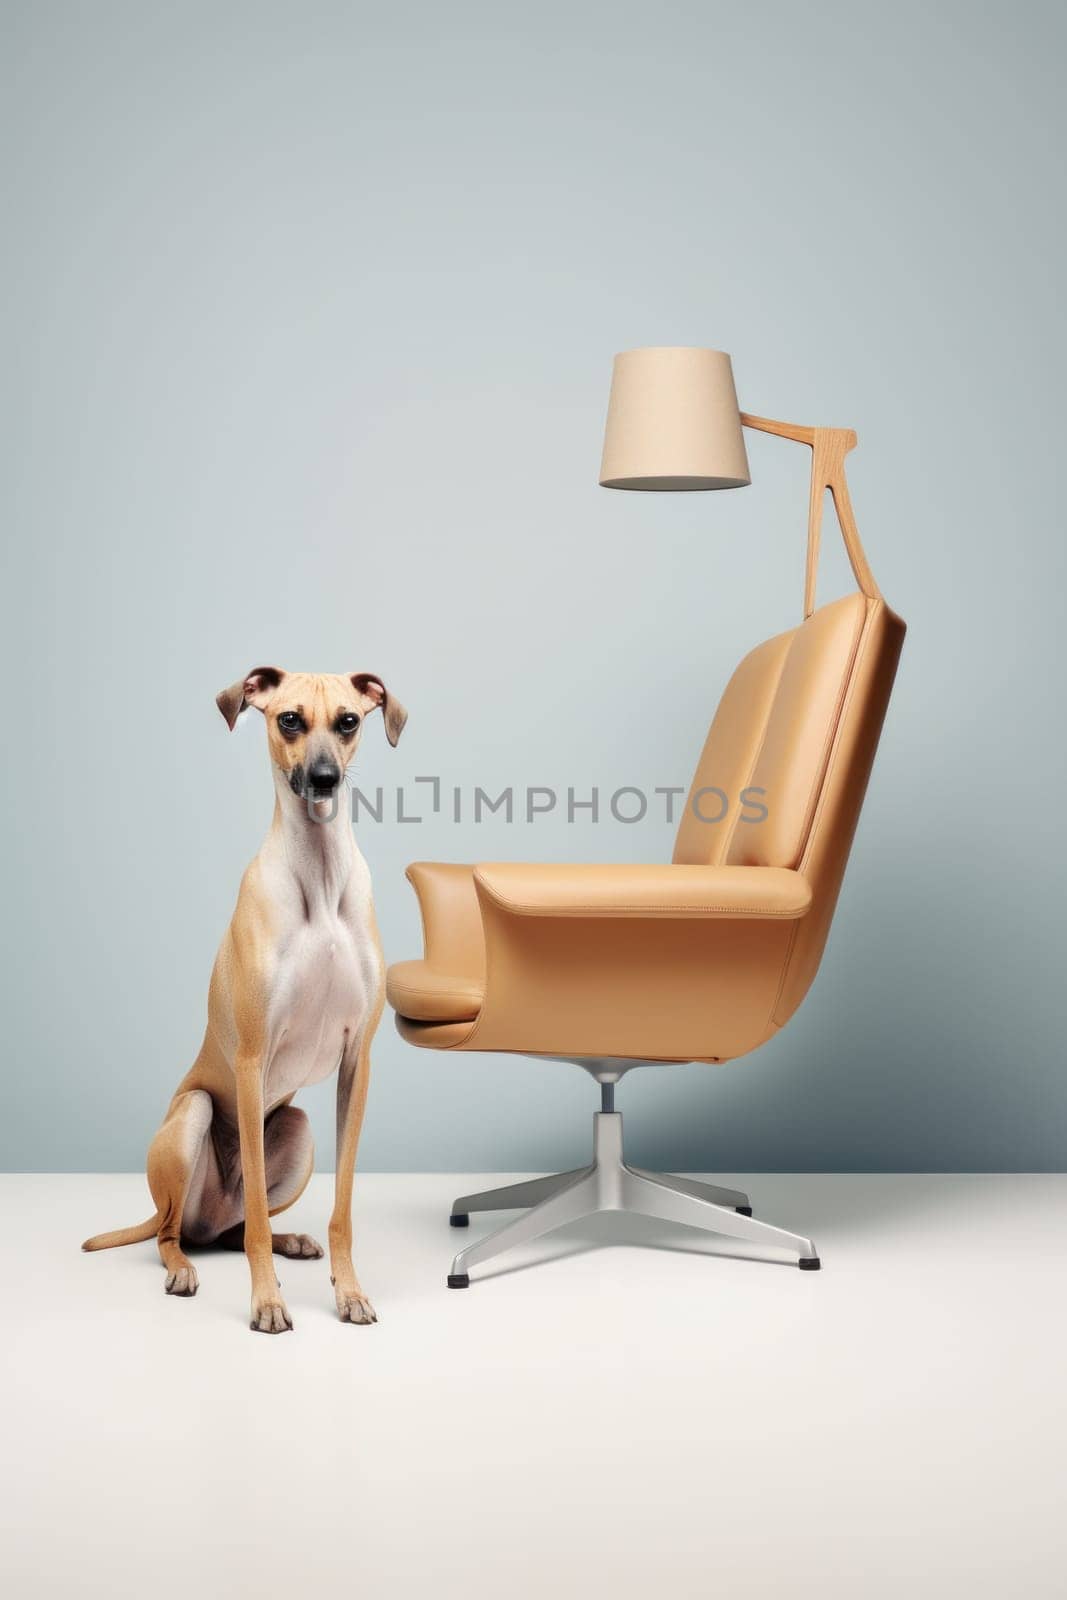 A dog sitting in a chair next to a lamp, AI by starush